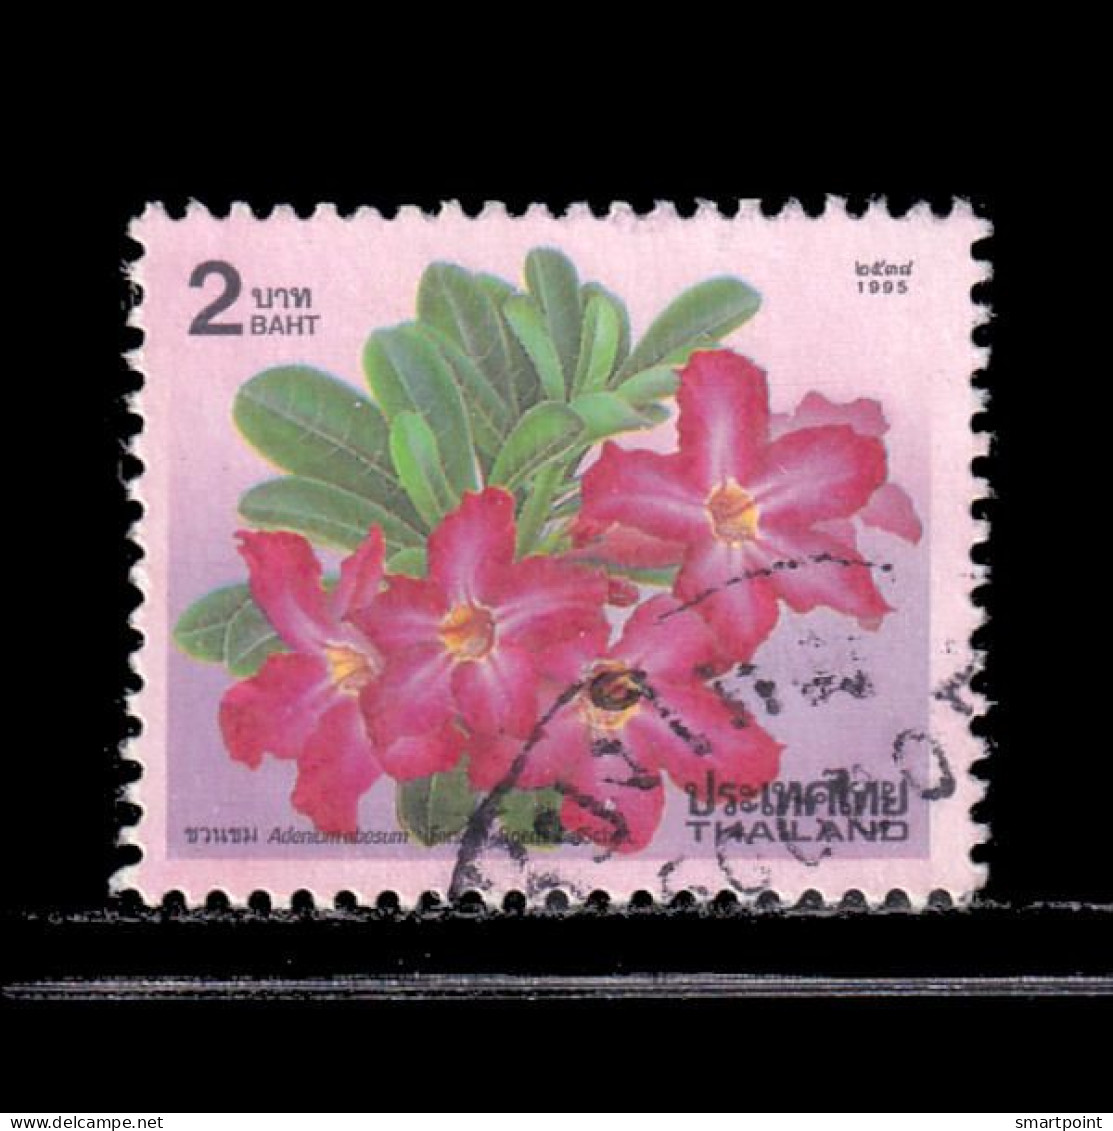 Thailand Stamp 1995 1996 New Year (8th Series) 2 Baht - Used - Thailand